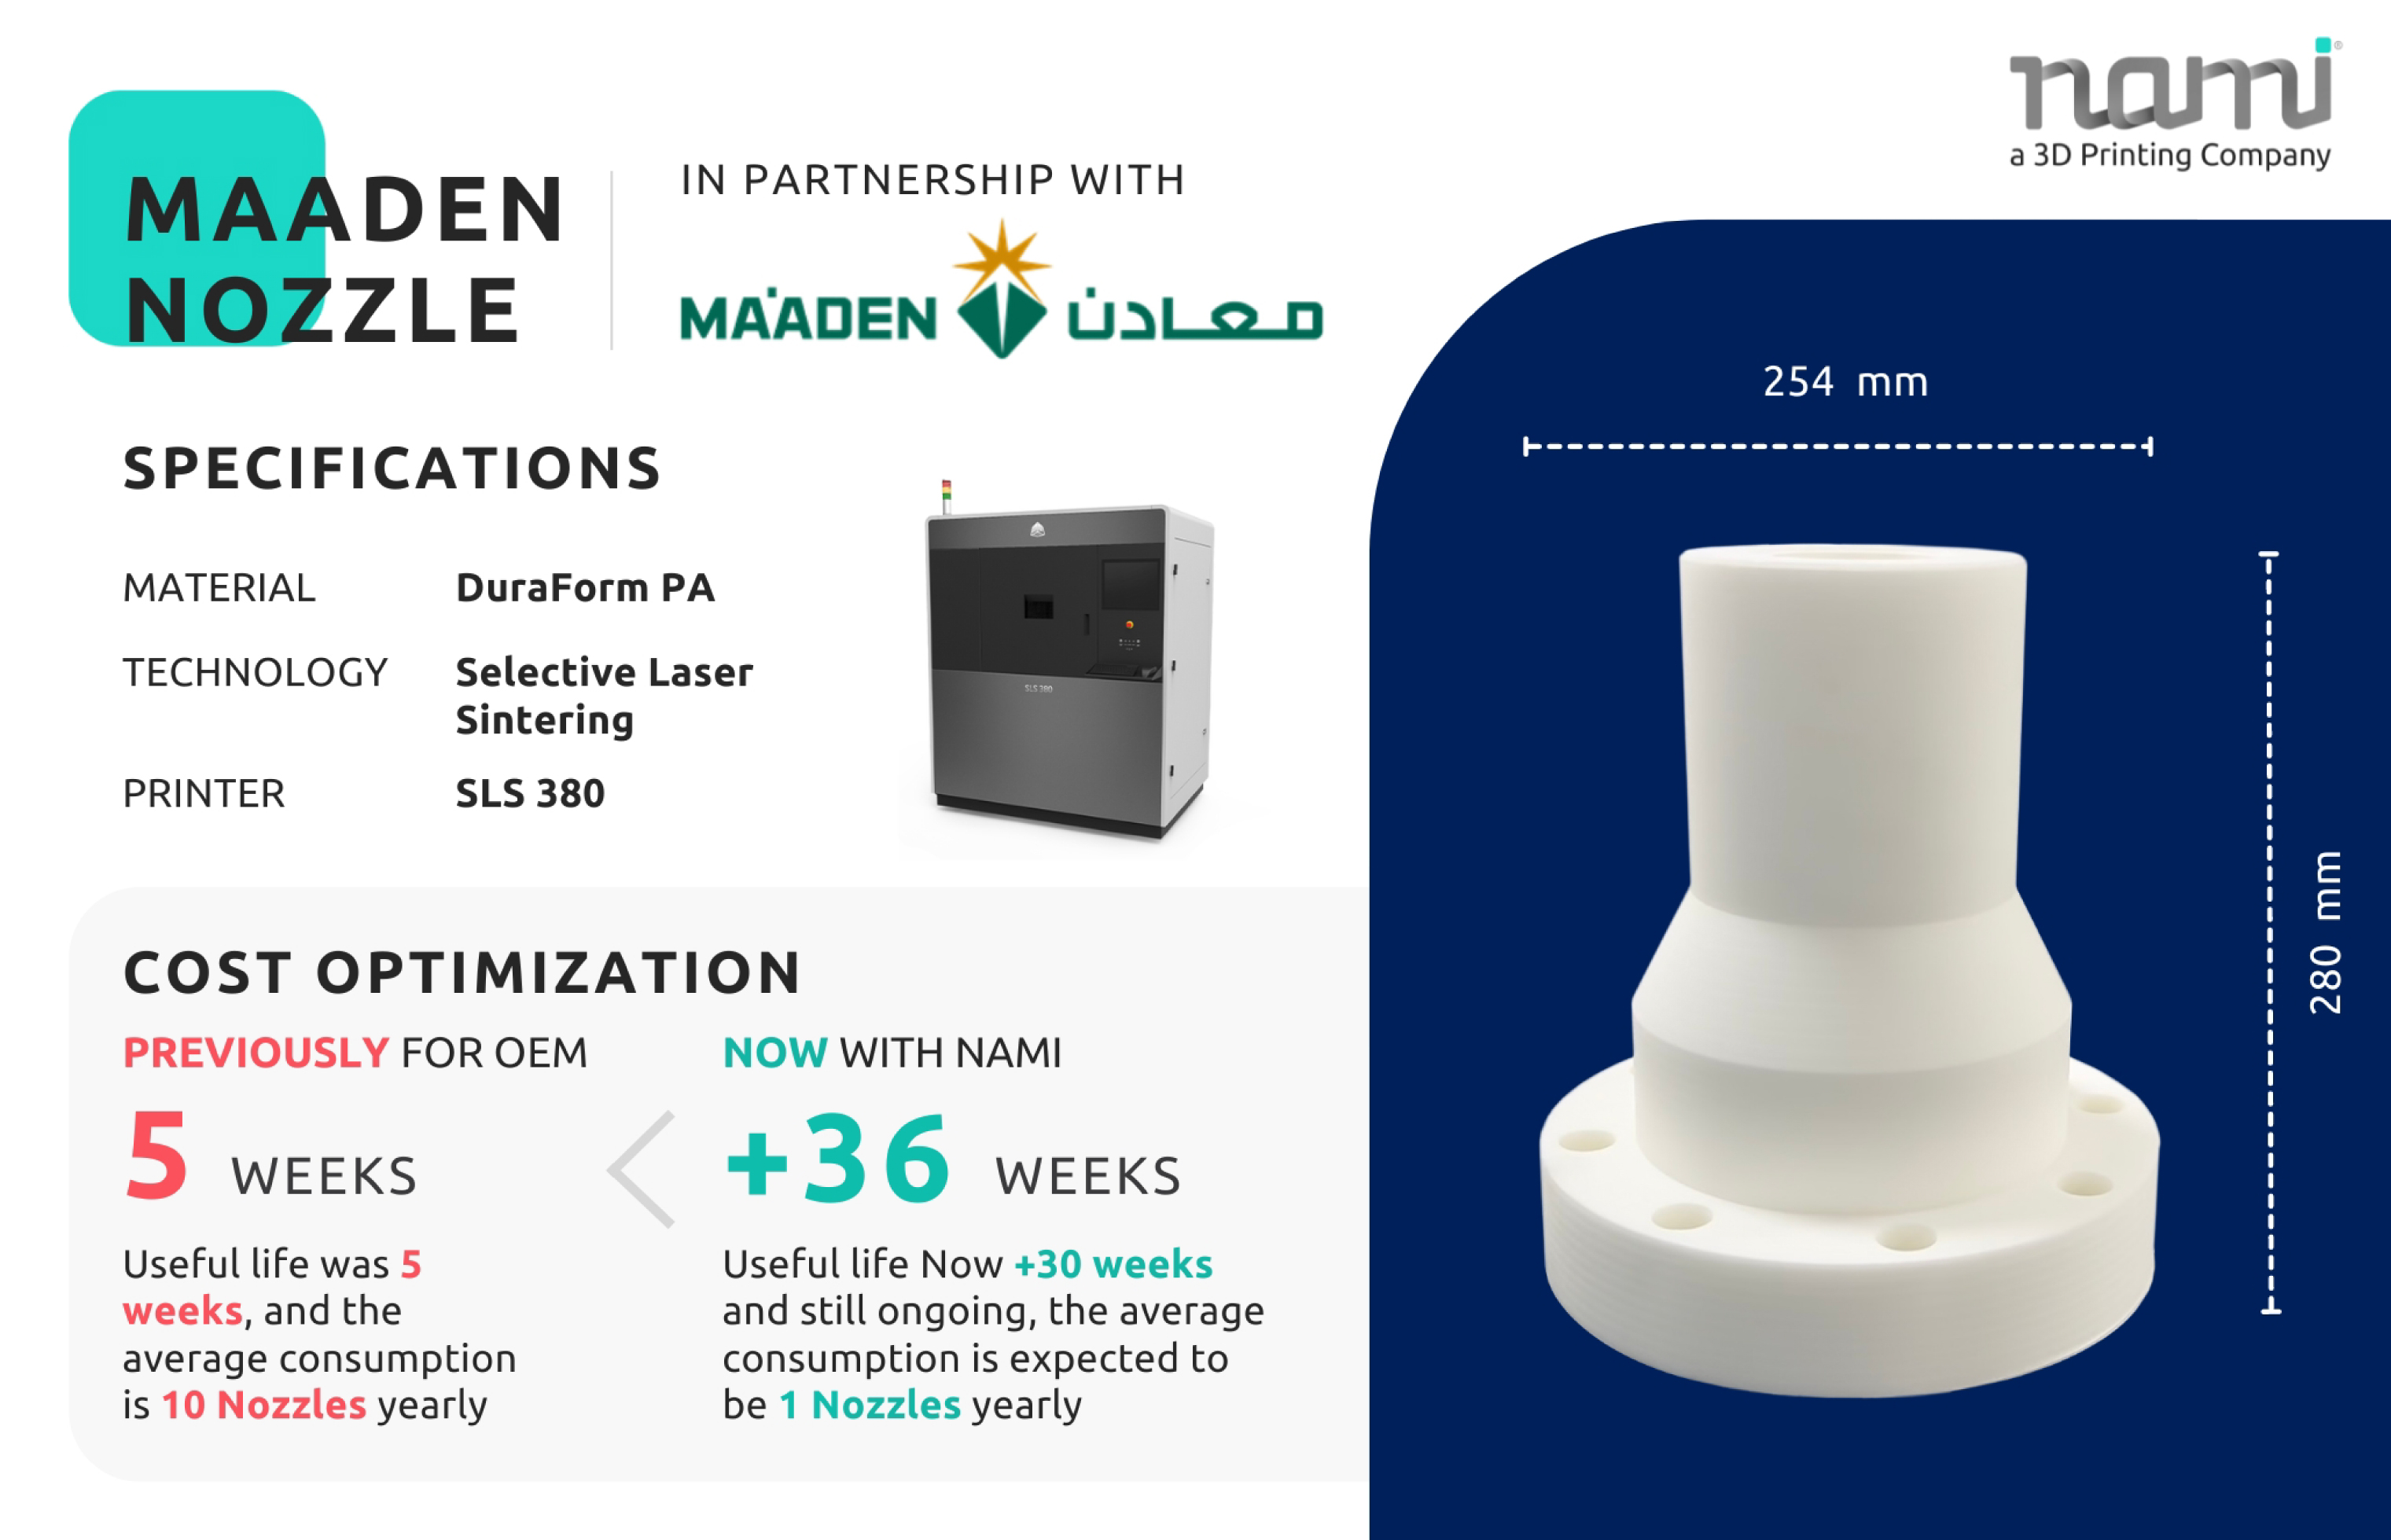 NAMI and Maaden |  A Groundbreaking Partnership in 3D Printing